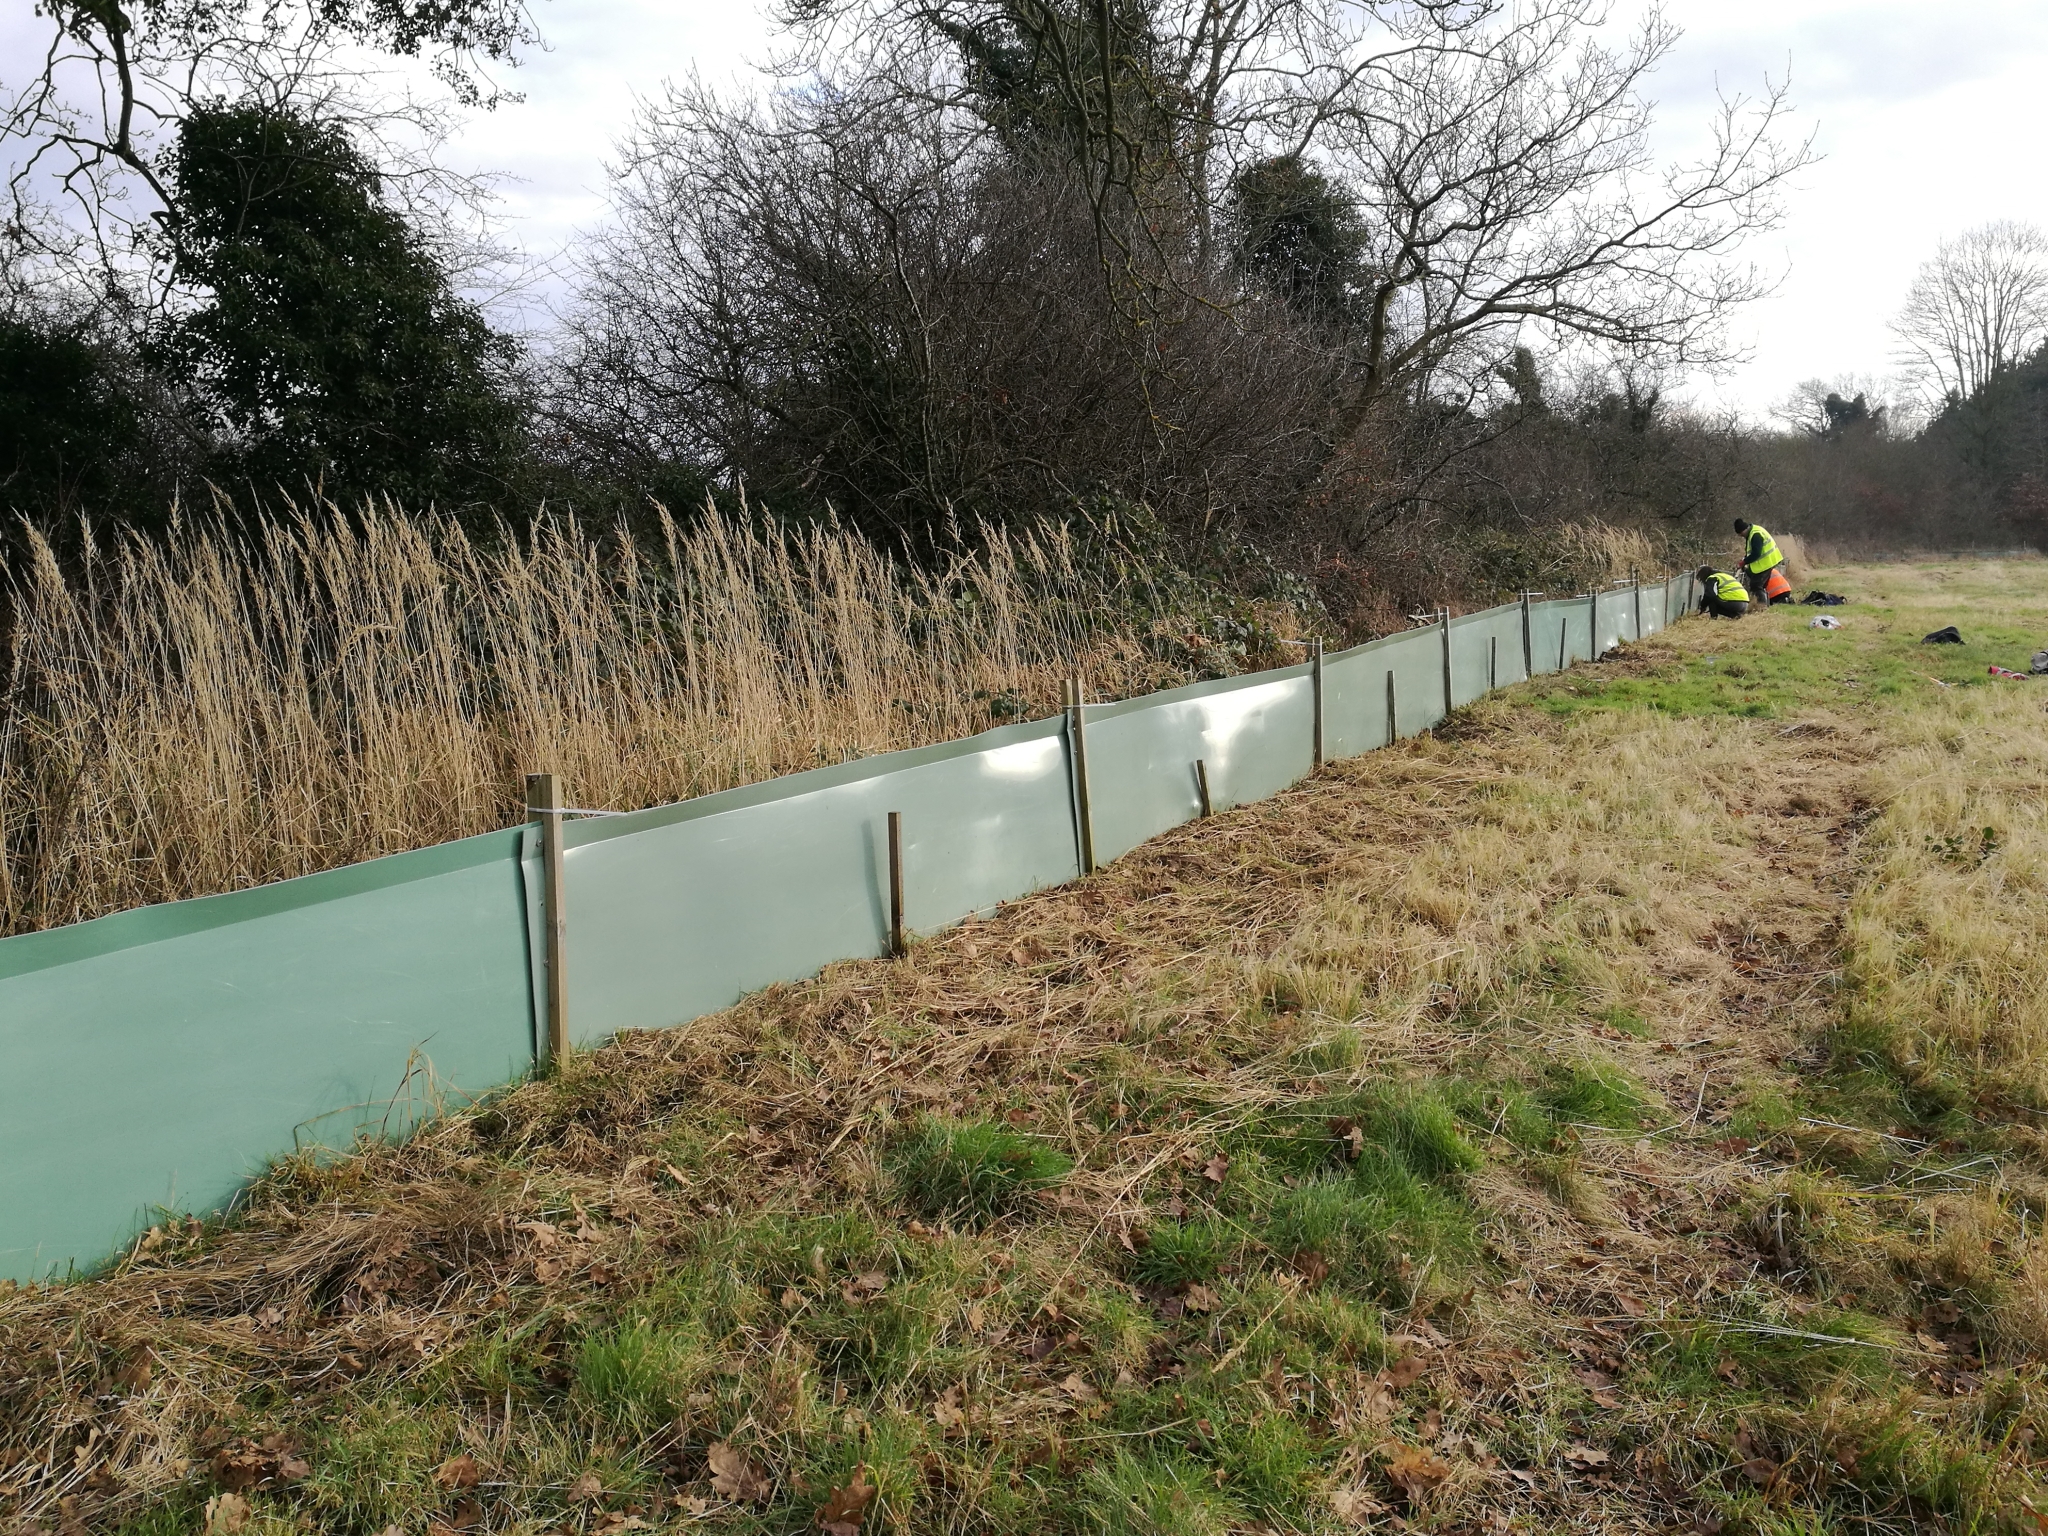 A photo from the FoTF Conservation Event - January 2022 - Erection of toad fence : A section of the toad fence, with volunteers working in the background